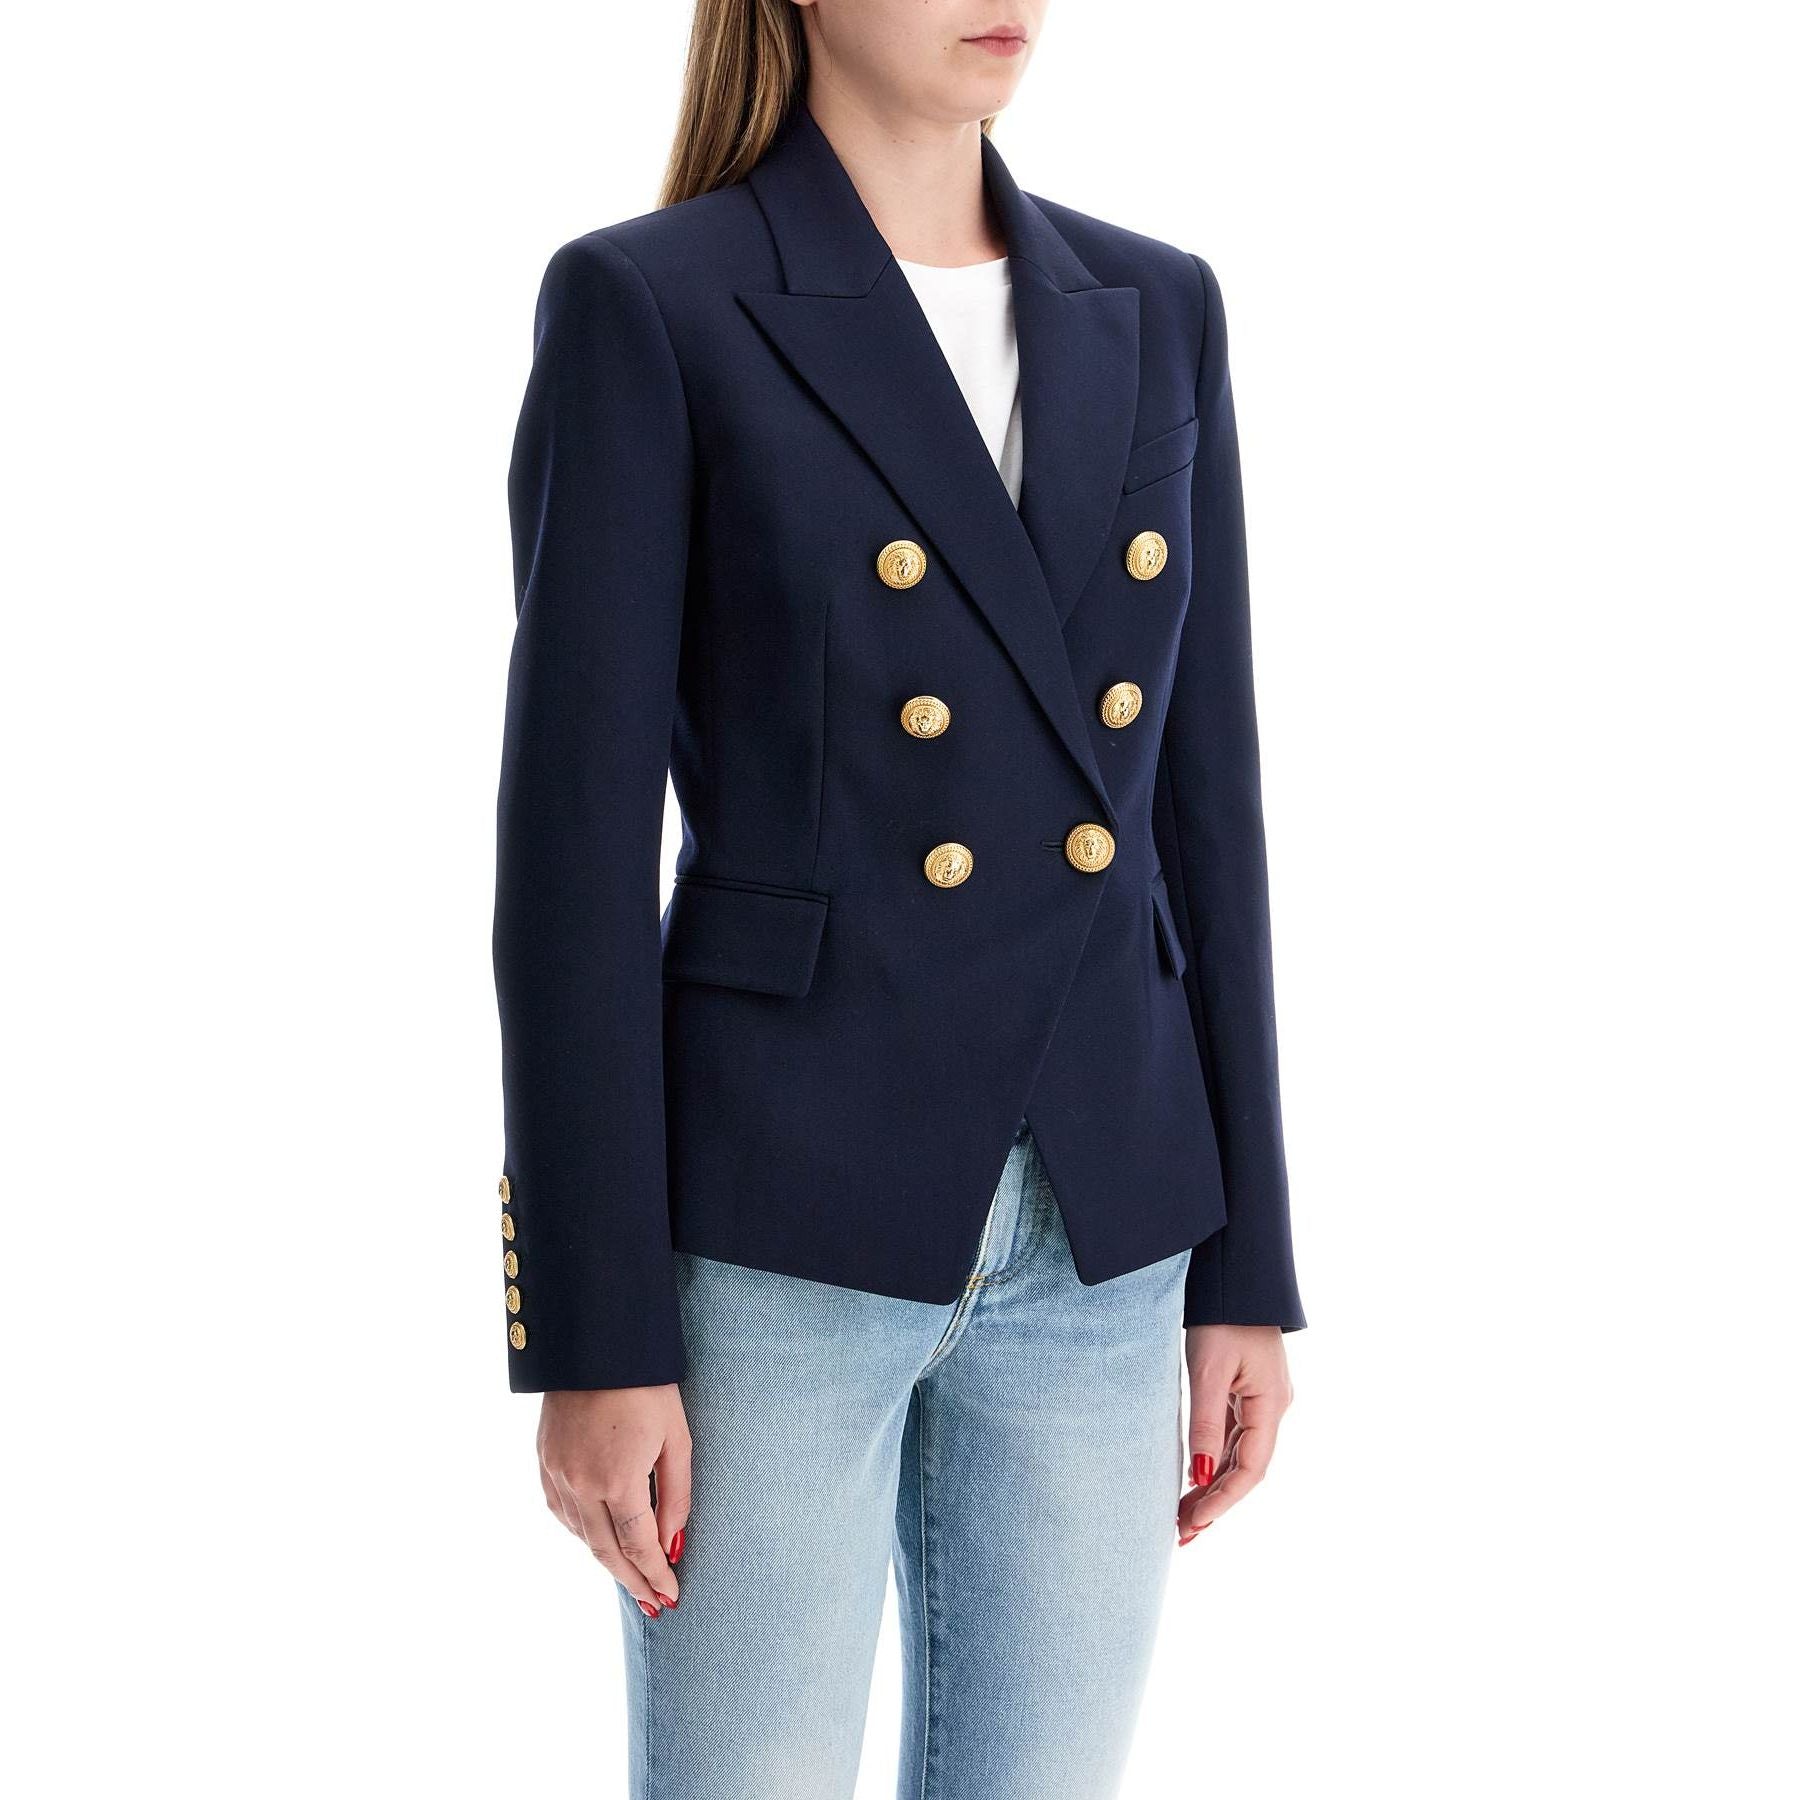 6-Button Double-Breasted Wool Jacket